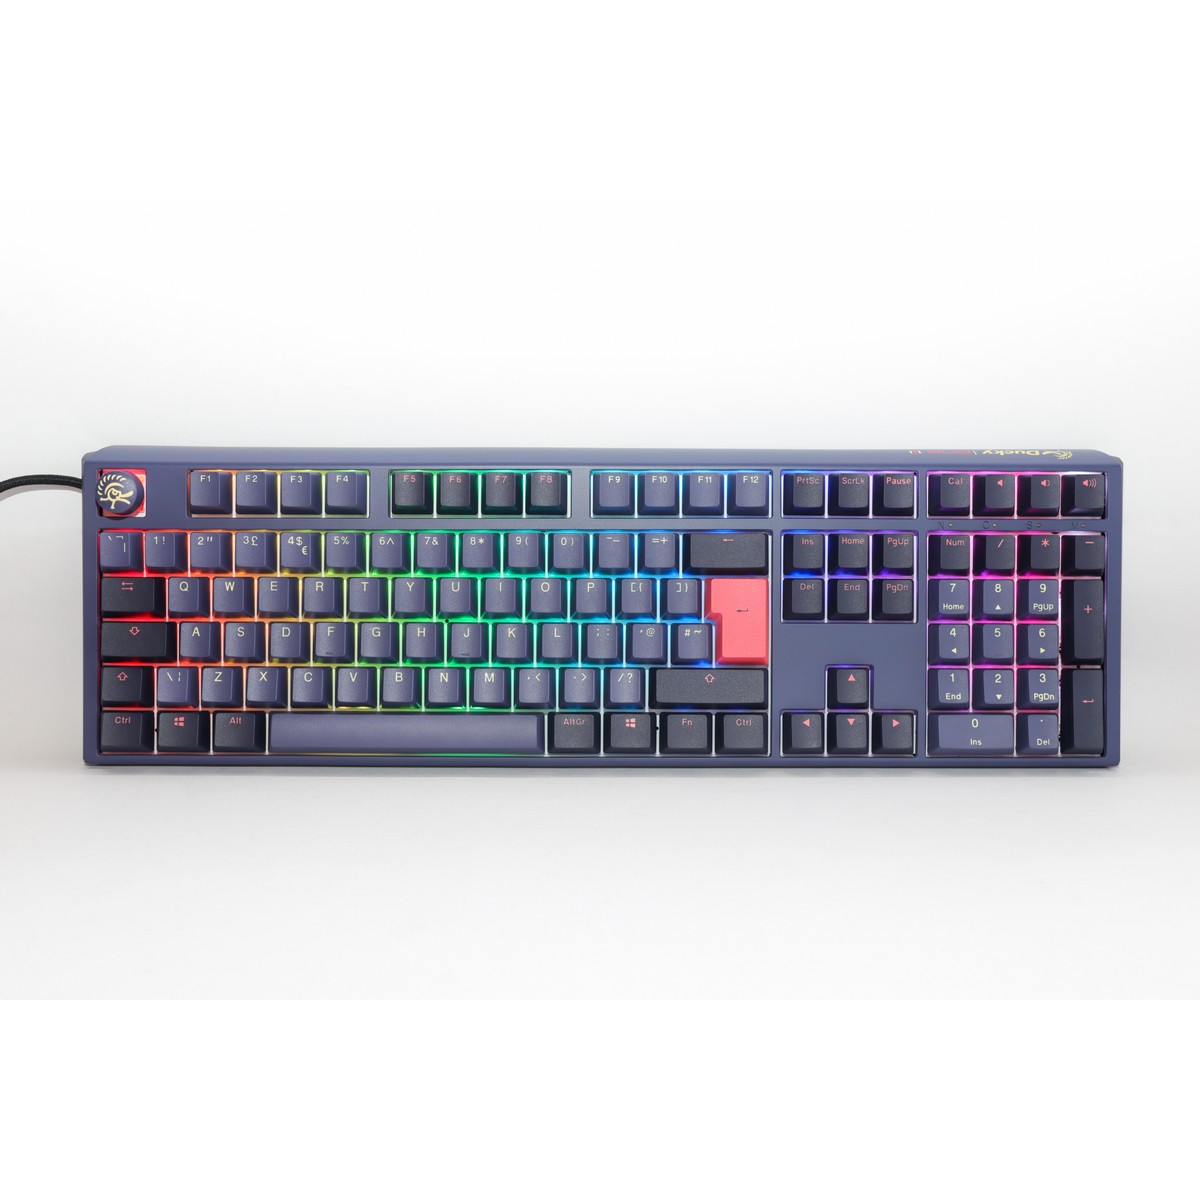 Ducky One 3 Cosmic USB RGB Mechanical Gaming Keyboard Cherry MX Red Switch - UK Layout